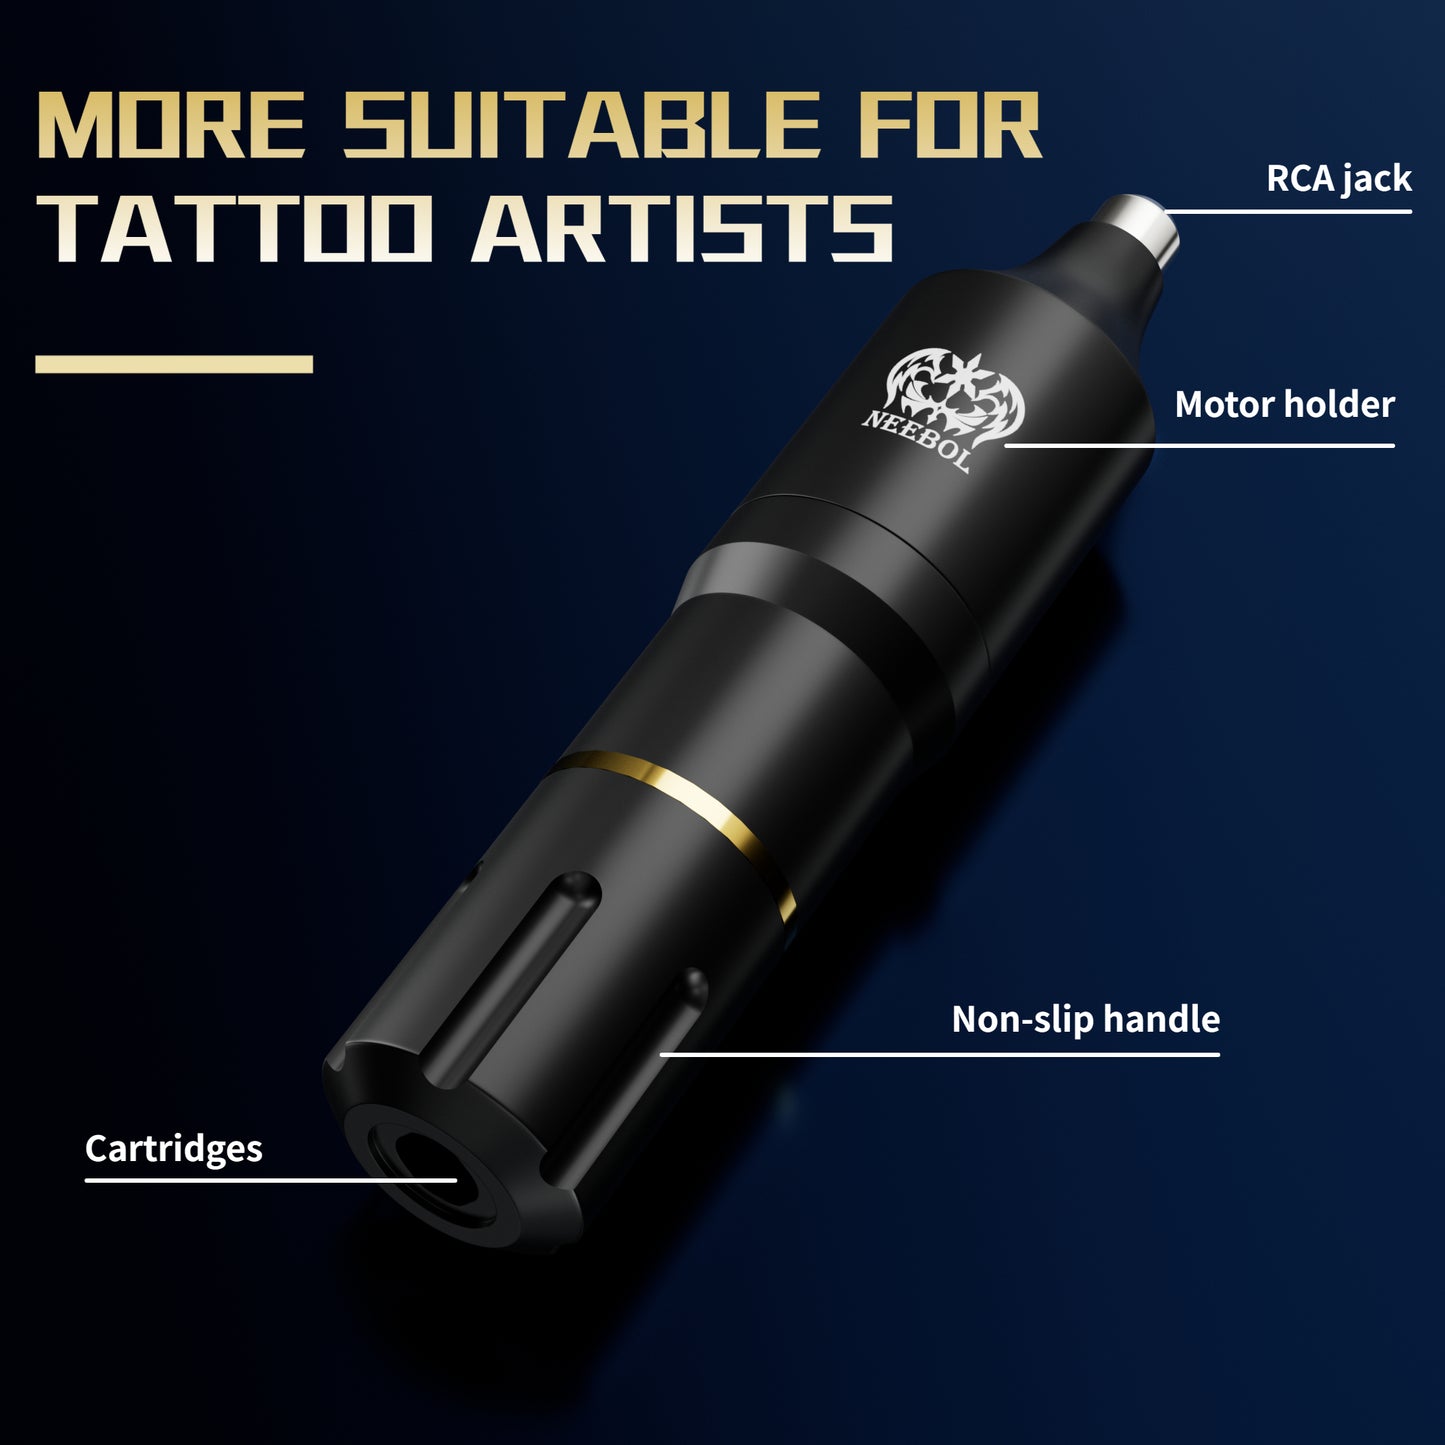 Neebol Tattoo Gun Kit, Rotary Tattoo Pen with Power Supply, Complete Tattoo Machine Package with Everything, OG Series